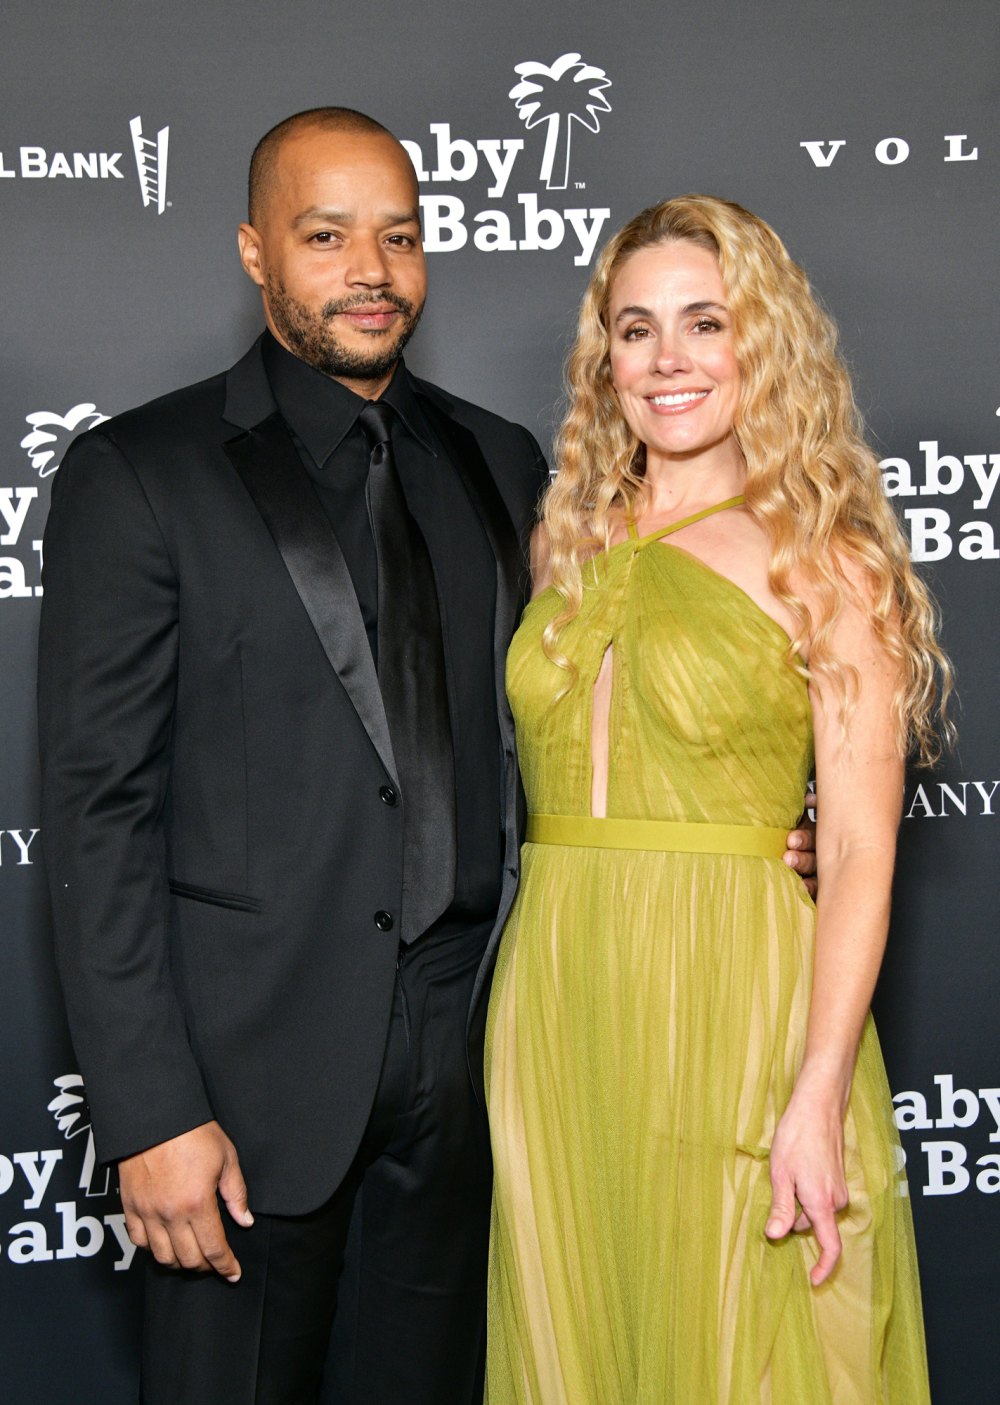 Donald Faison Admits He Has Never Seen Wife CaCee Cobb